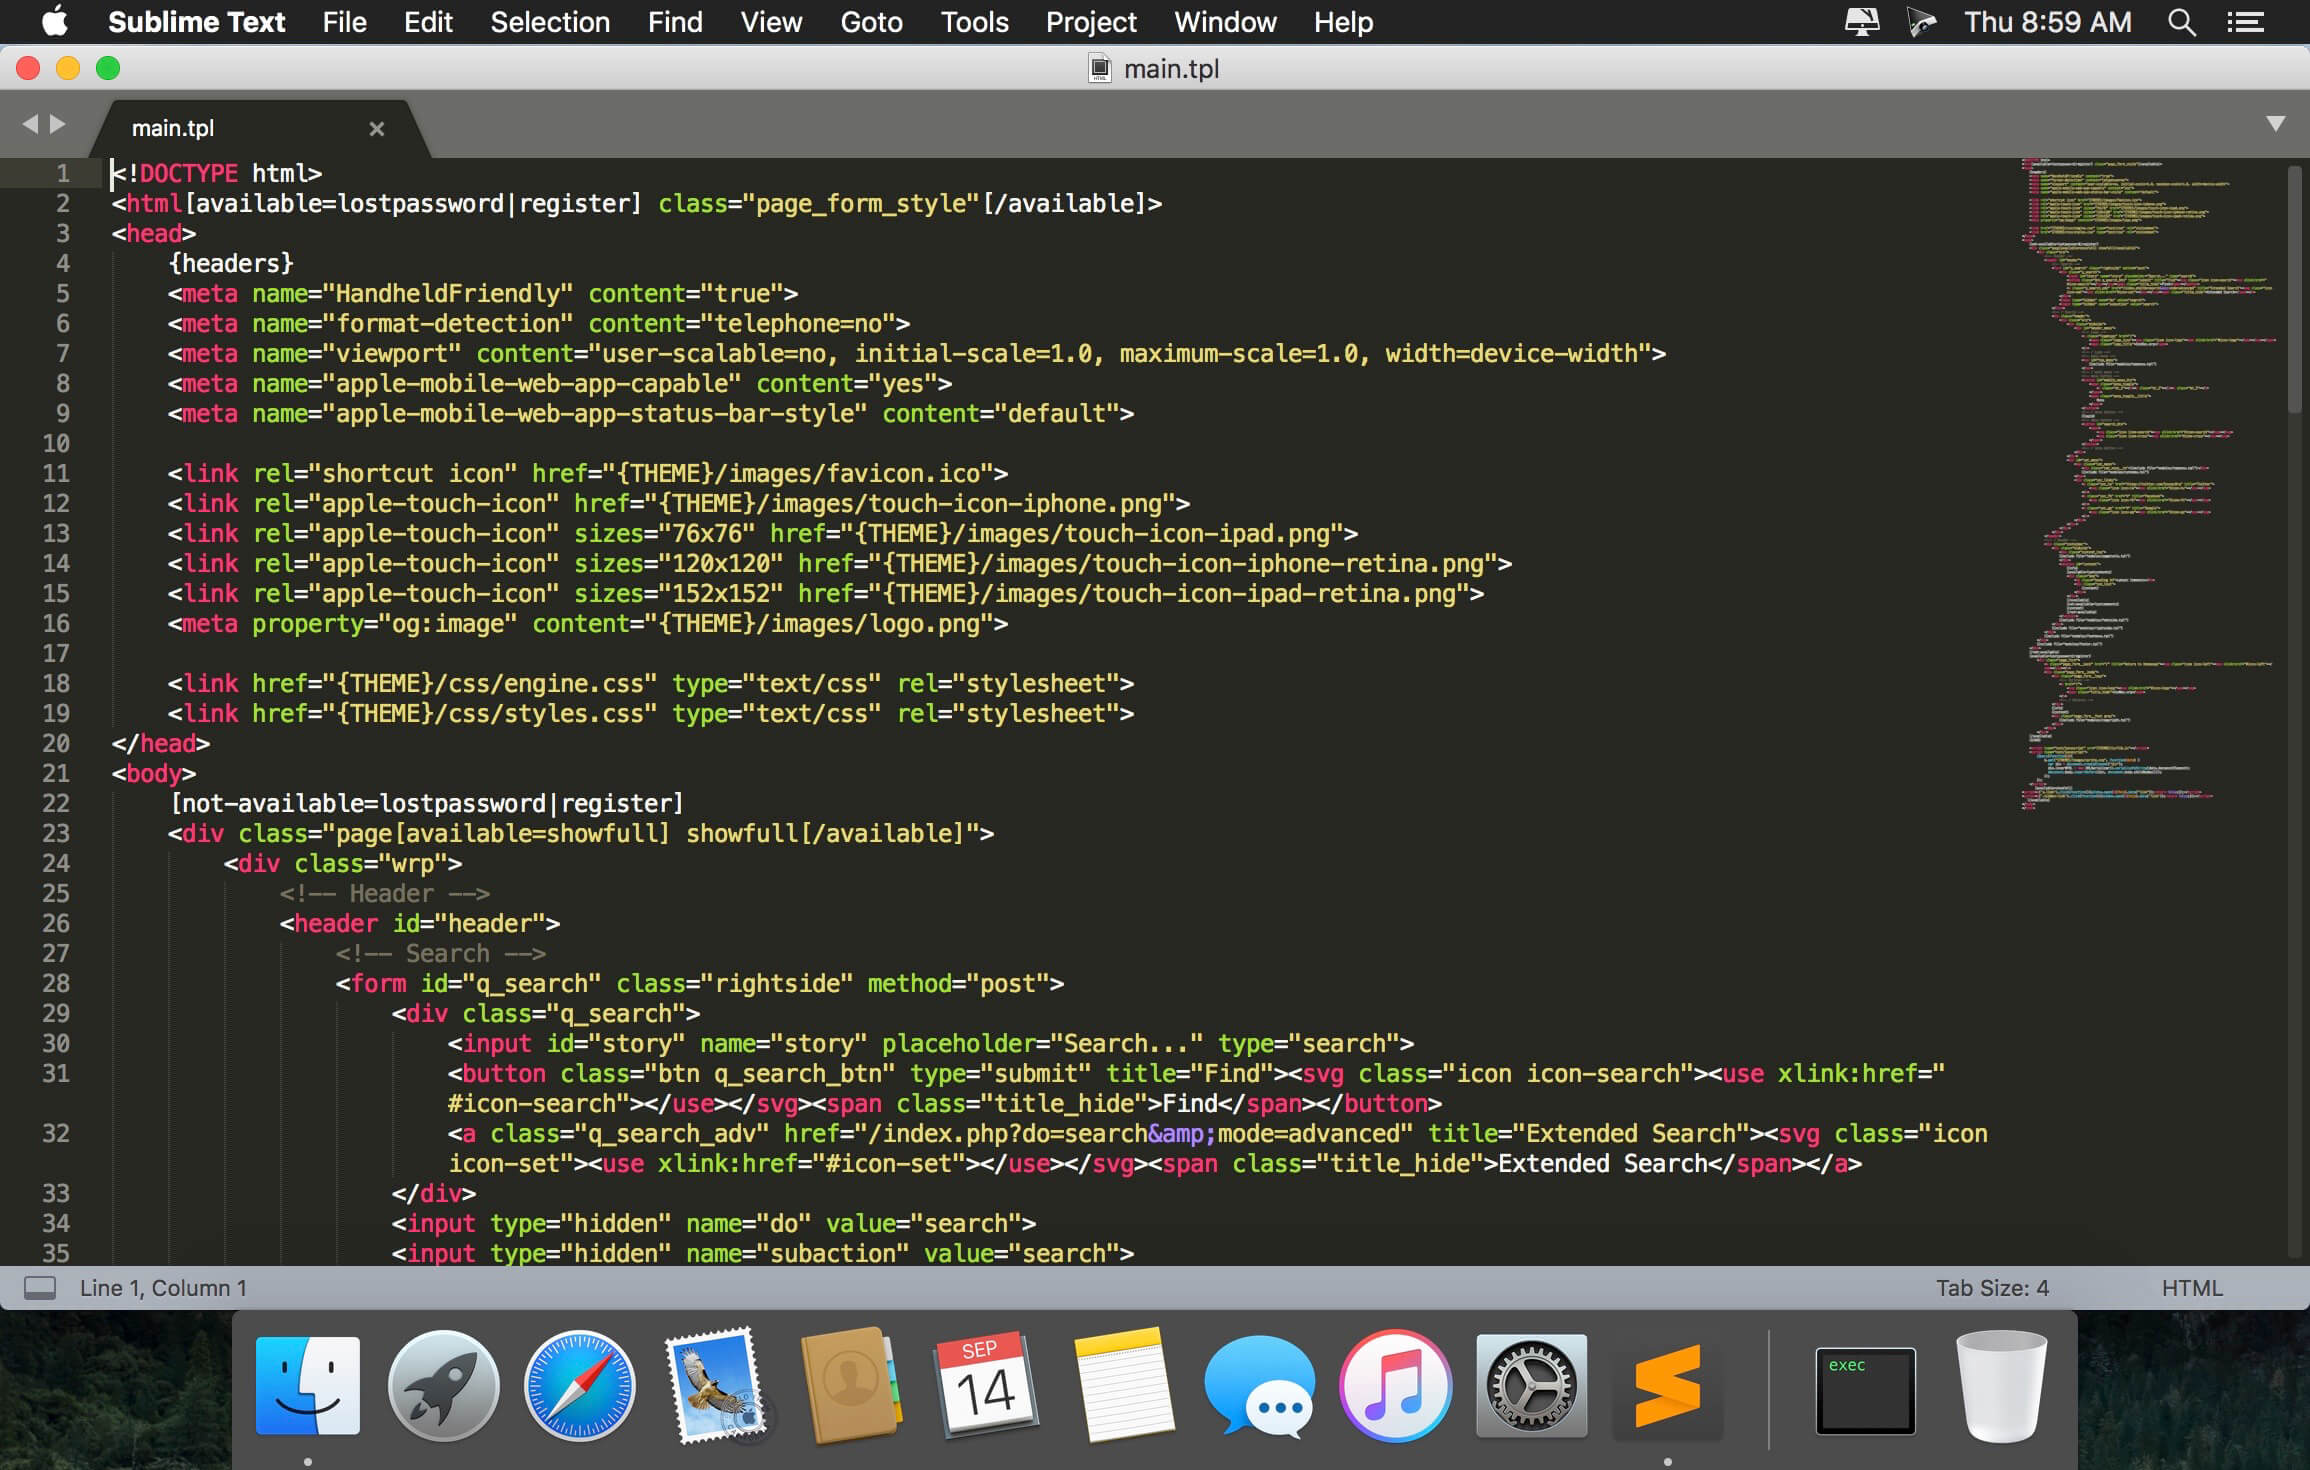 sublime text 2 download free for mac